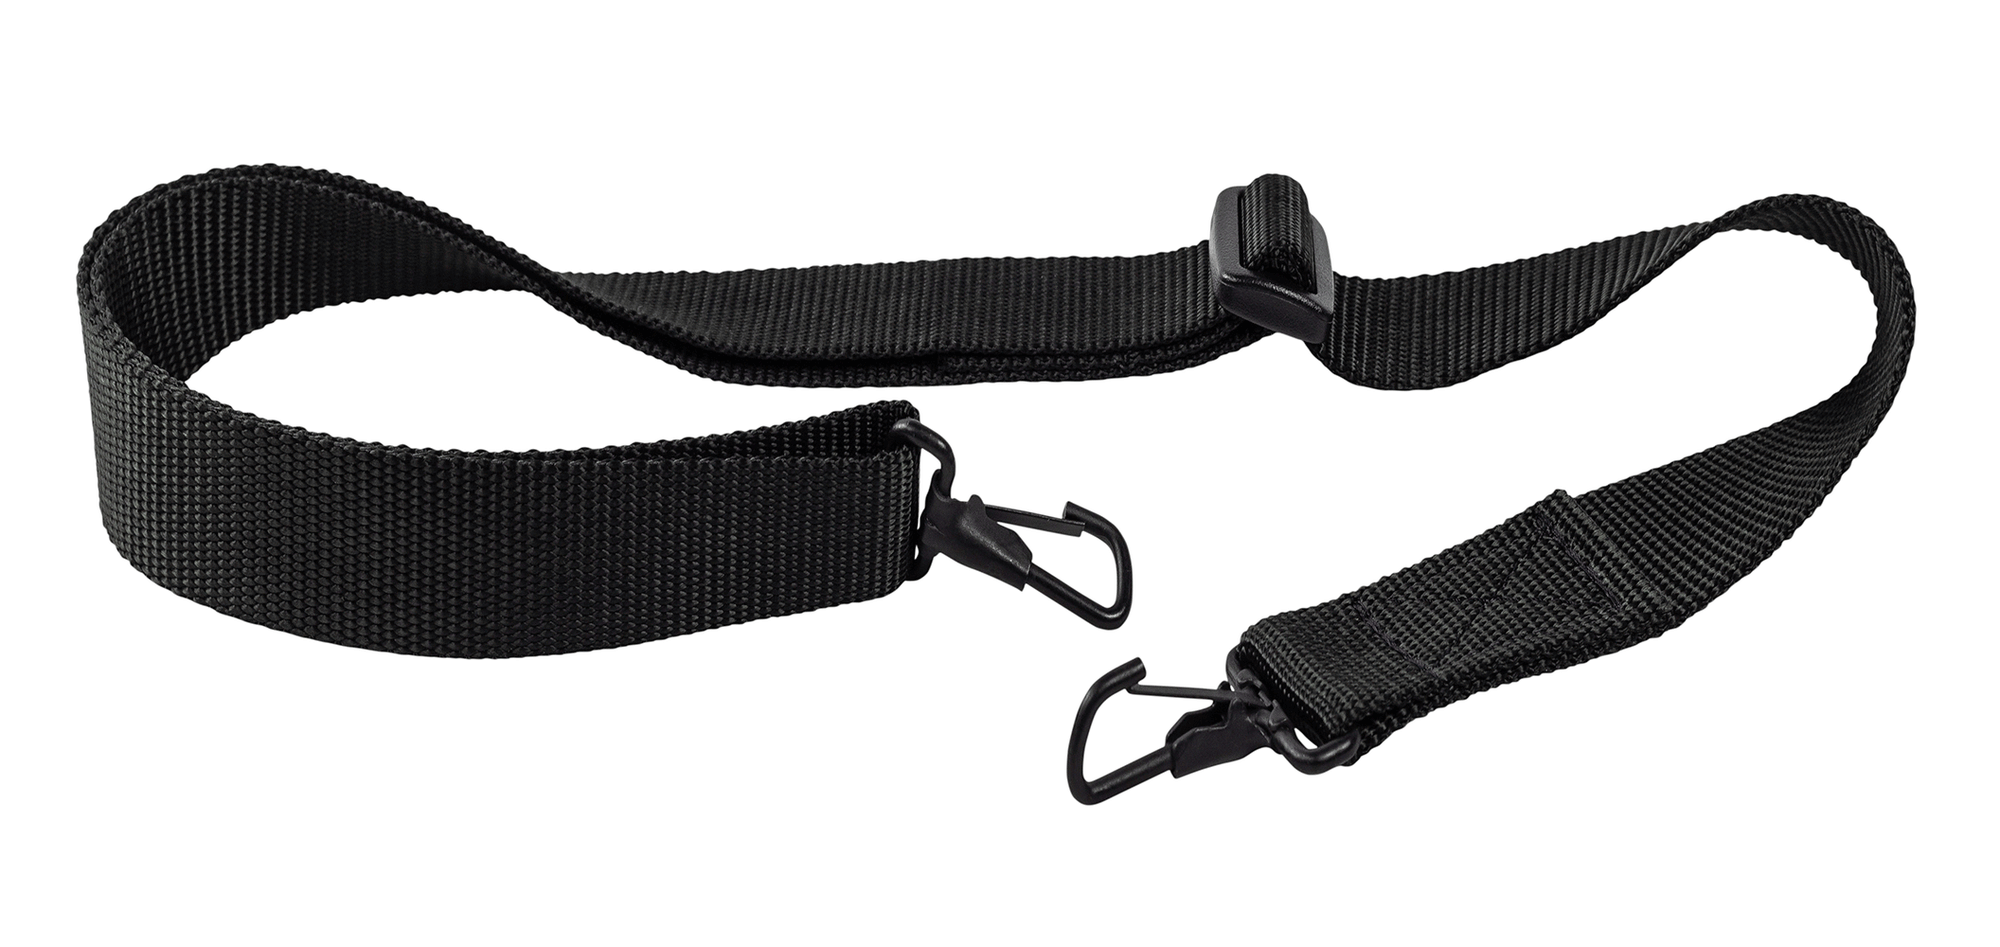 SUBMACHINE GUN STYLE TACTICAL SLING